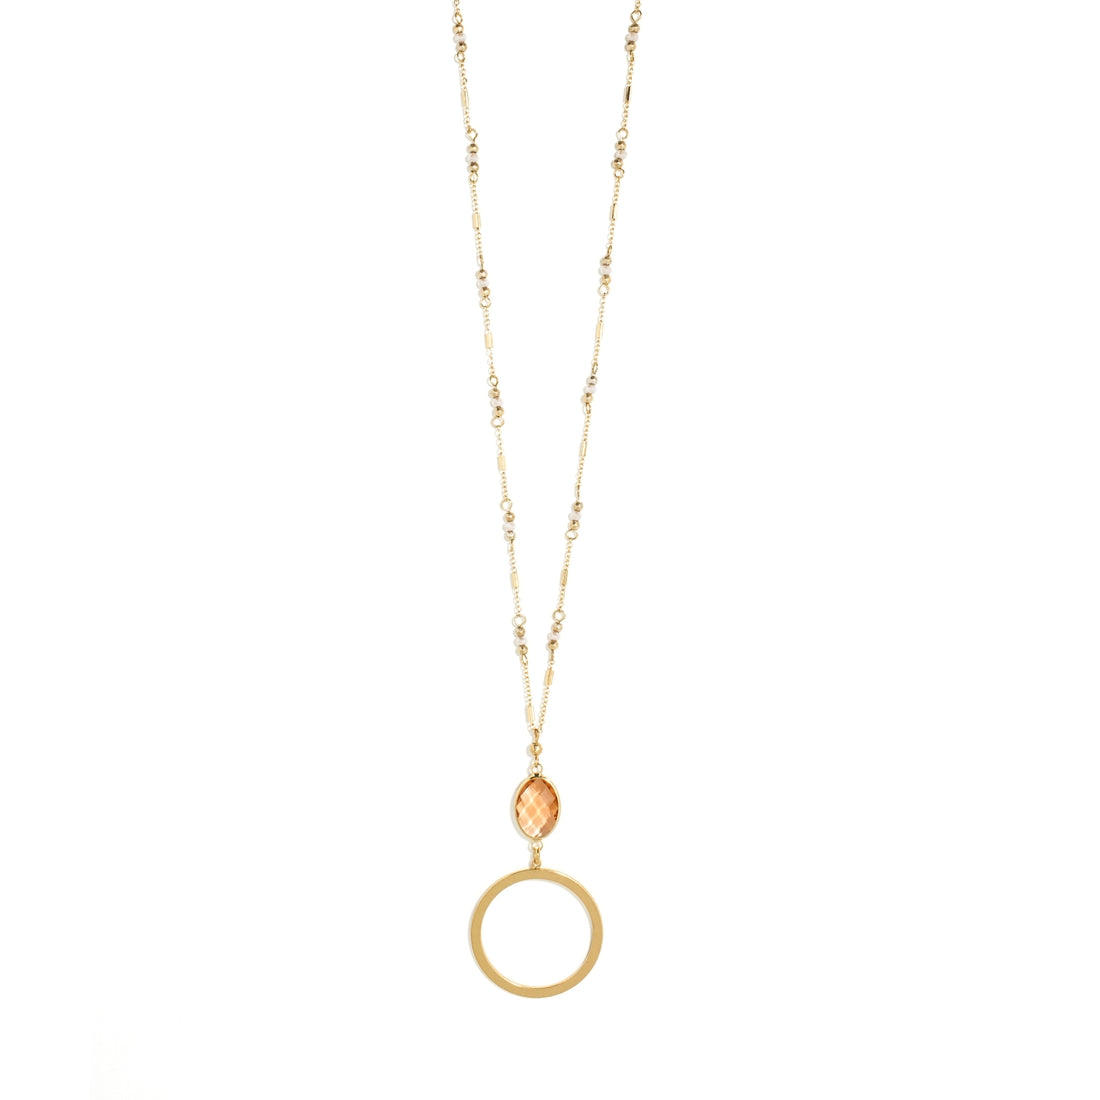 Long Crystal Necklace - Peach Pendant (Gold)